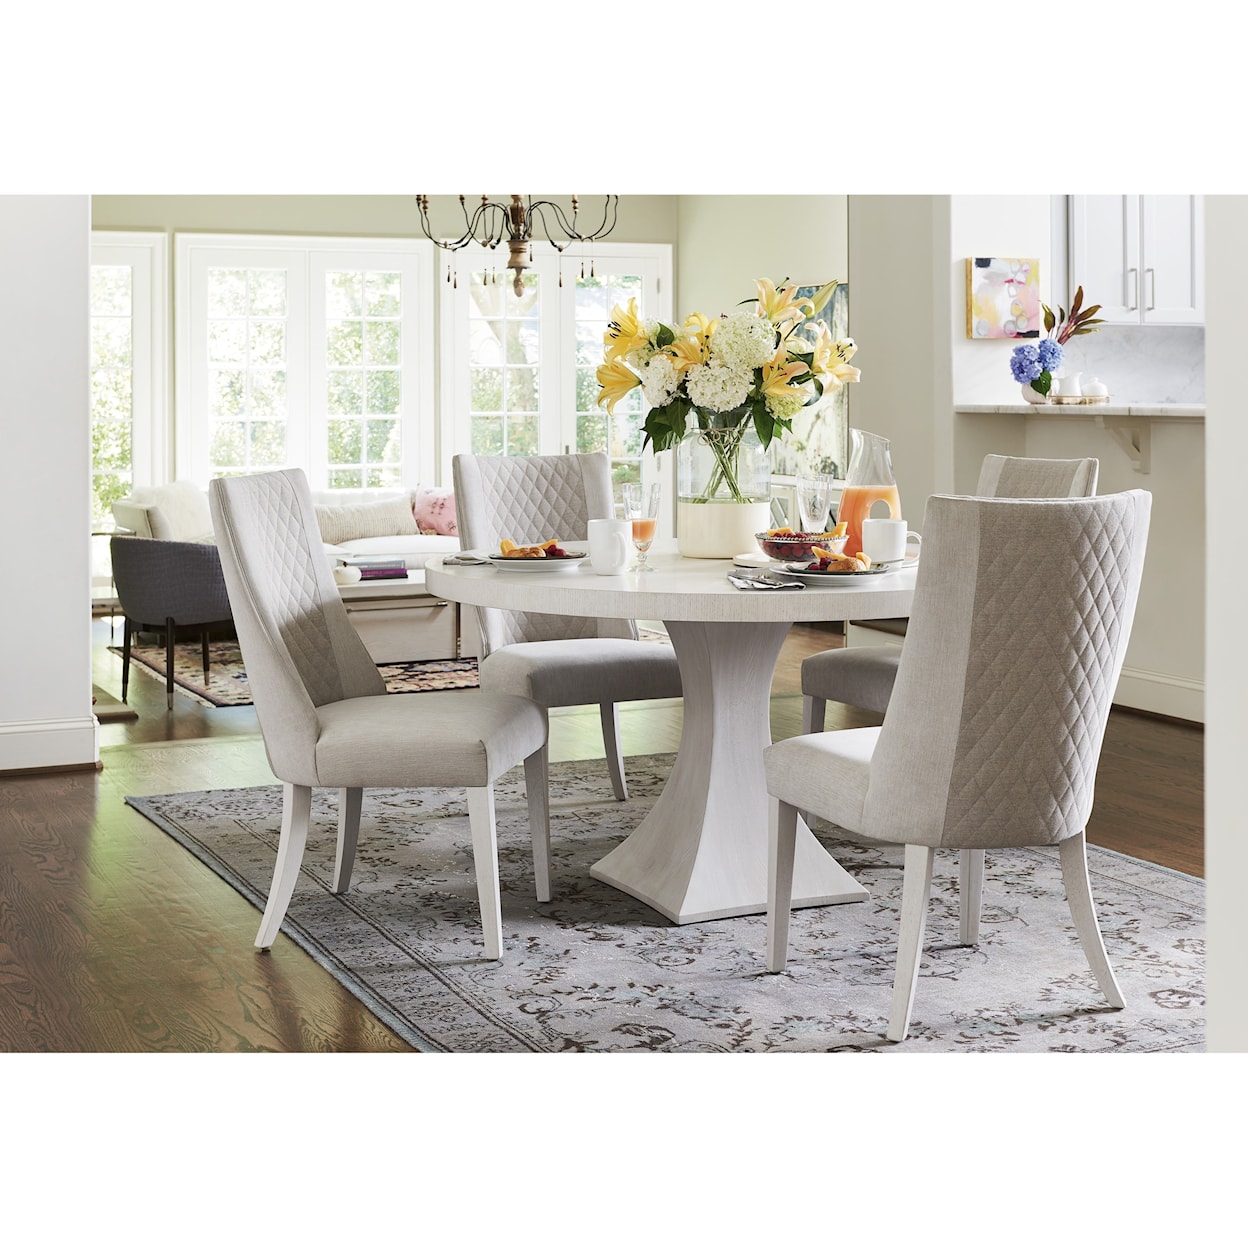 Universal Paradox Integrity Dining Table